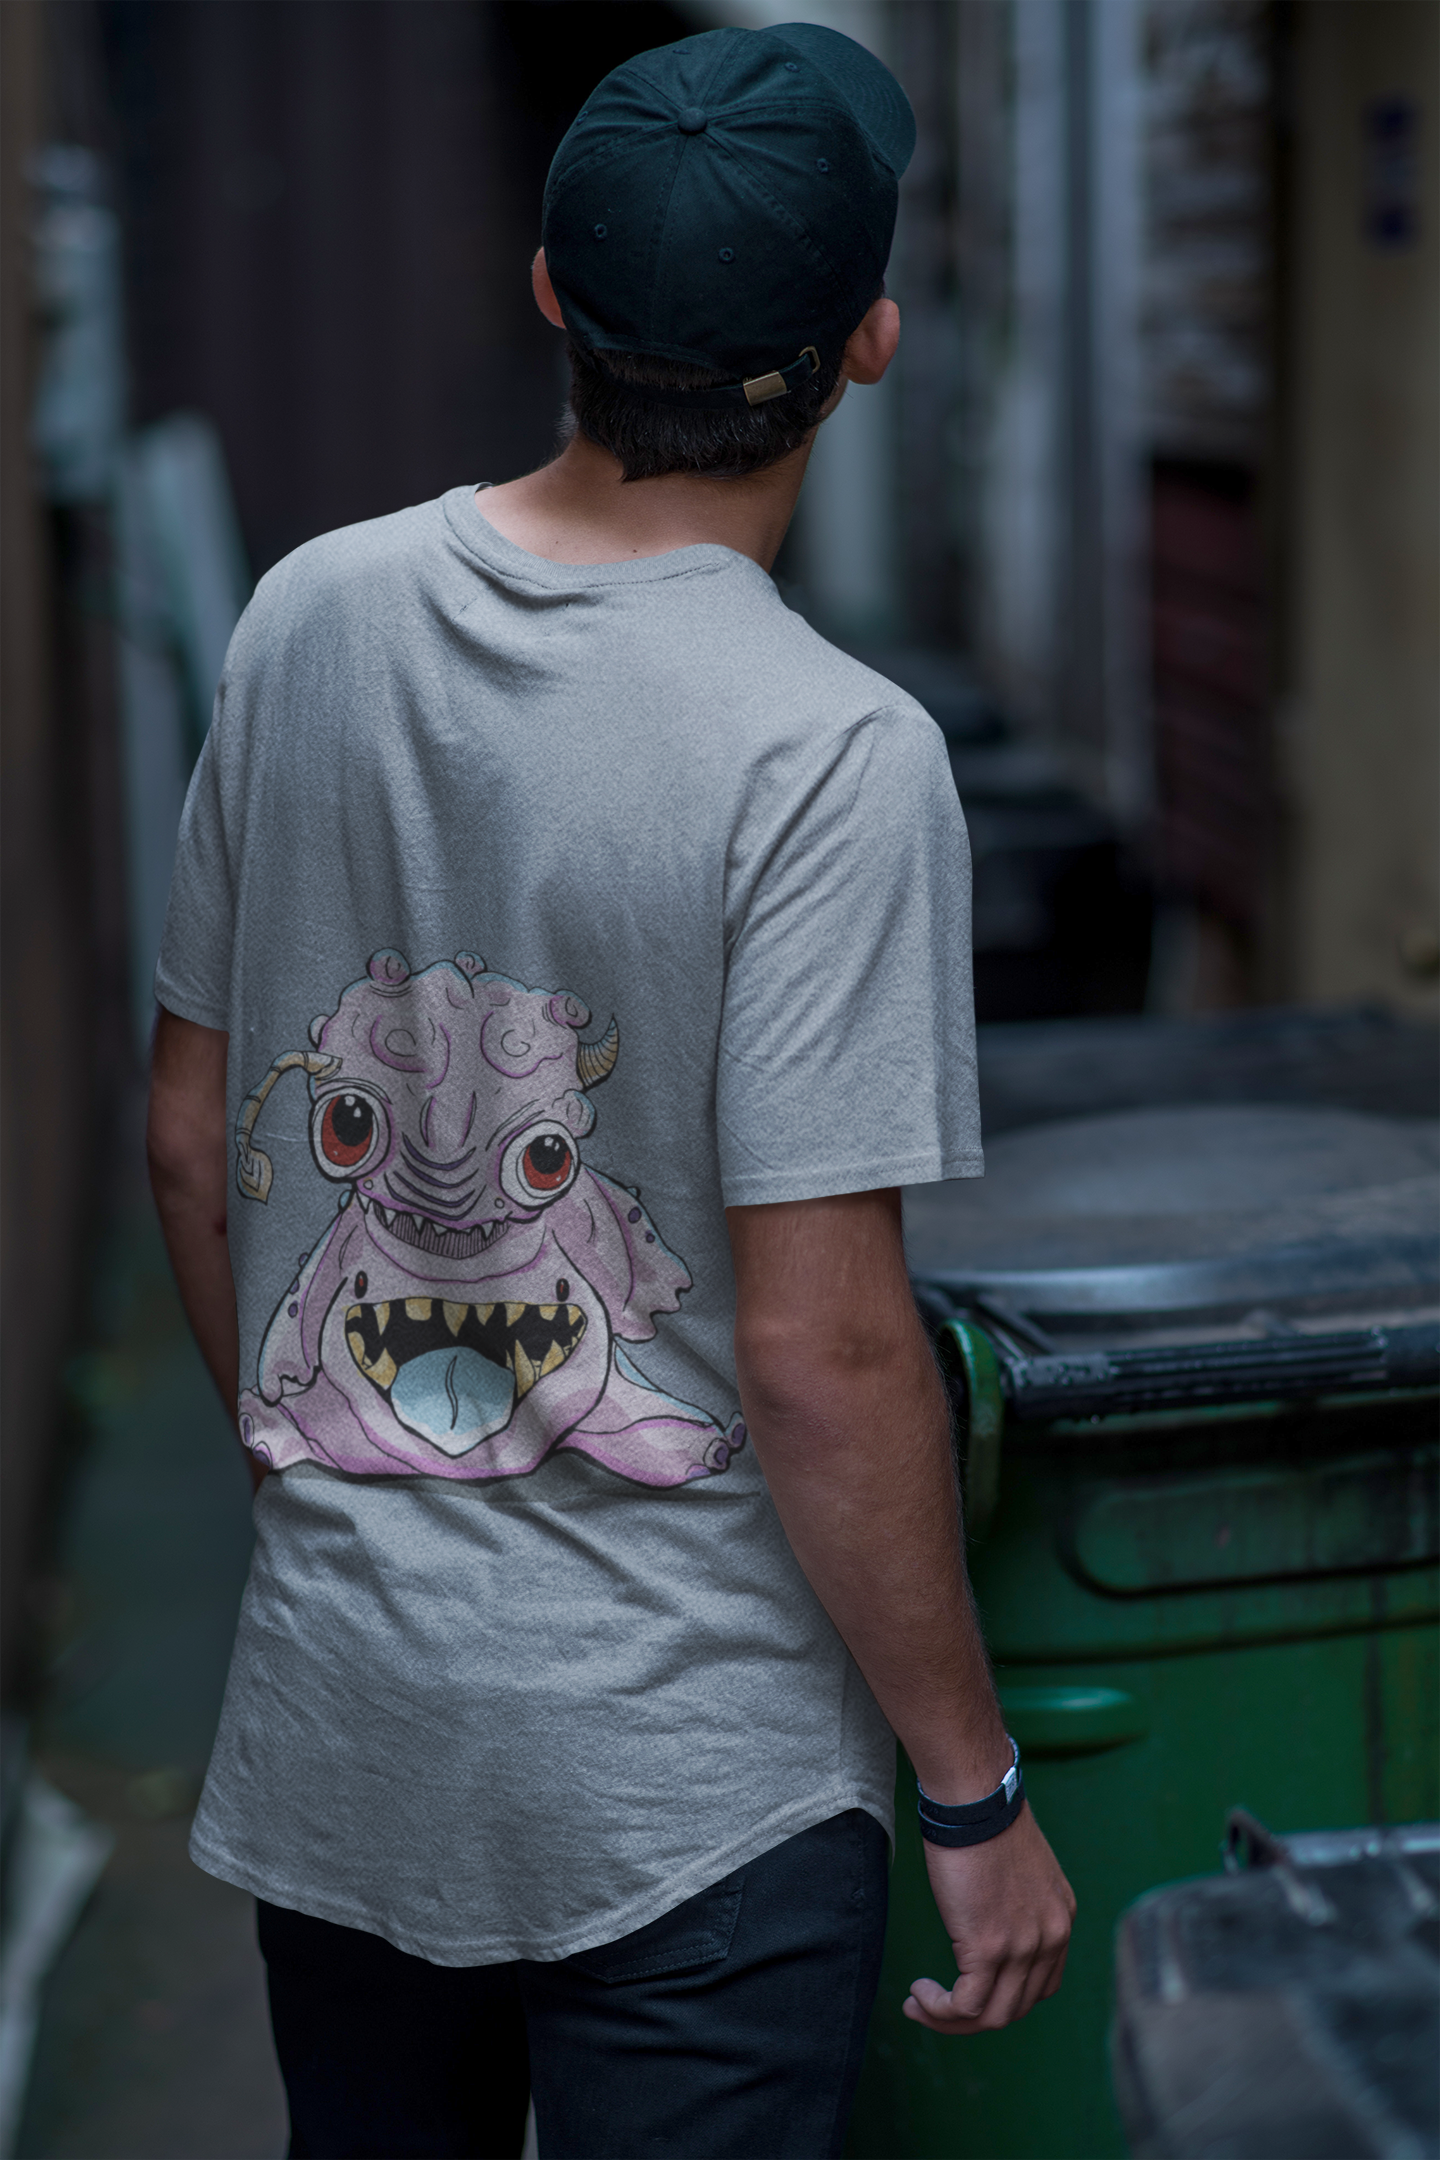 A man in a cap standing back towards camera in an alley in a pale blue shirt. With a pink bublegum looking alien creature on the back of the shirt